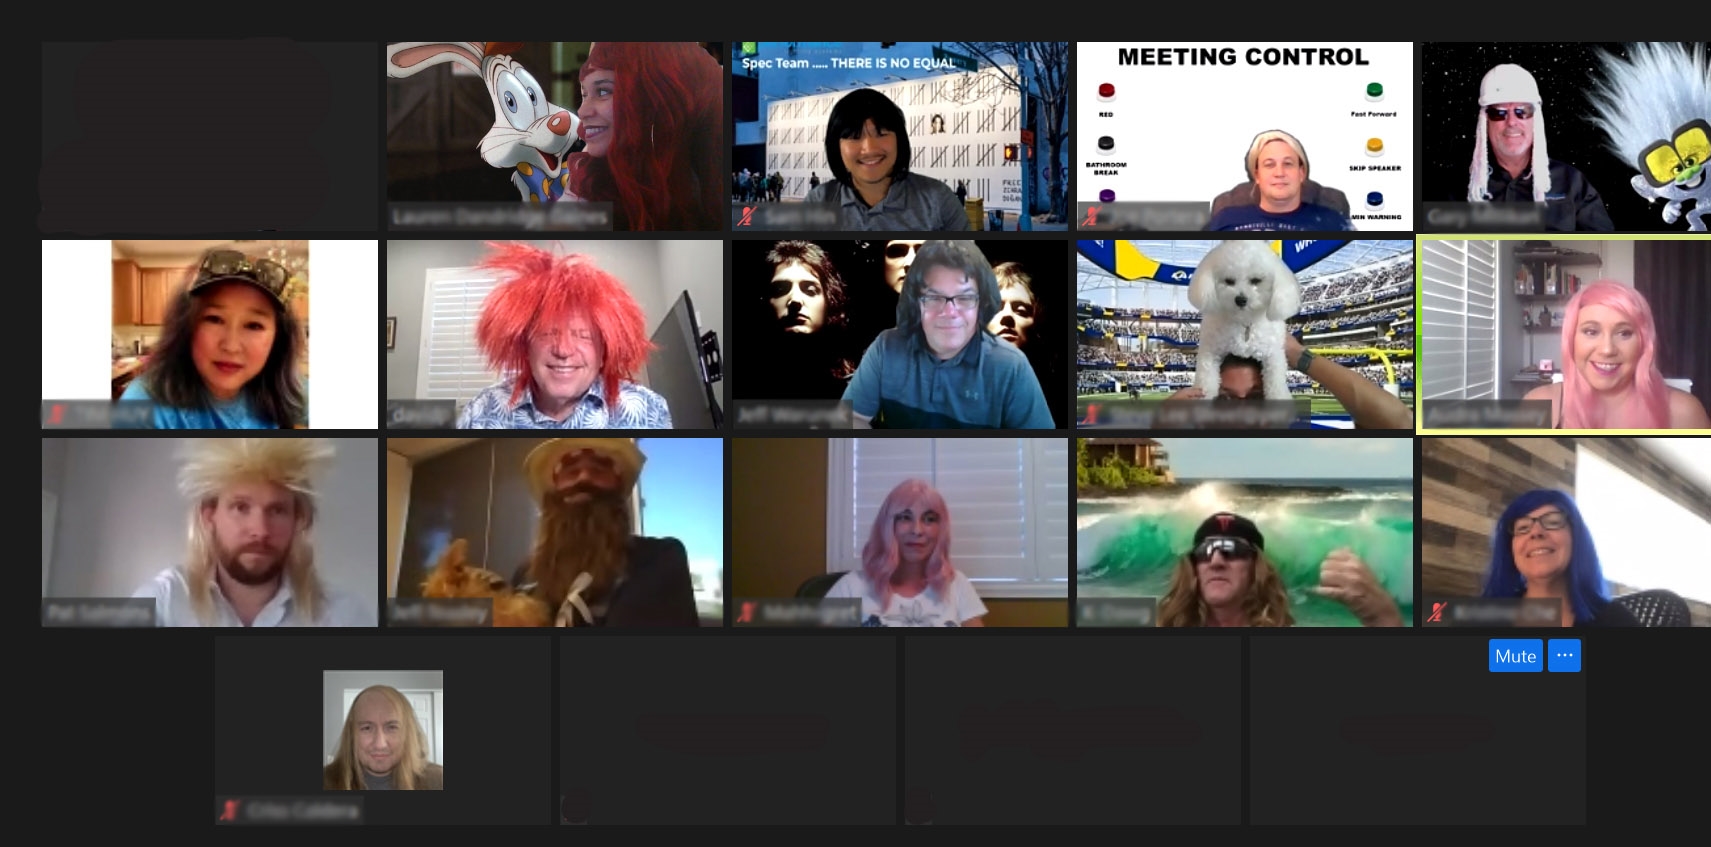 Our Specification team meets up every Thursday over Zoom and decided to wear wigs and add some fun!